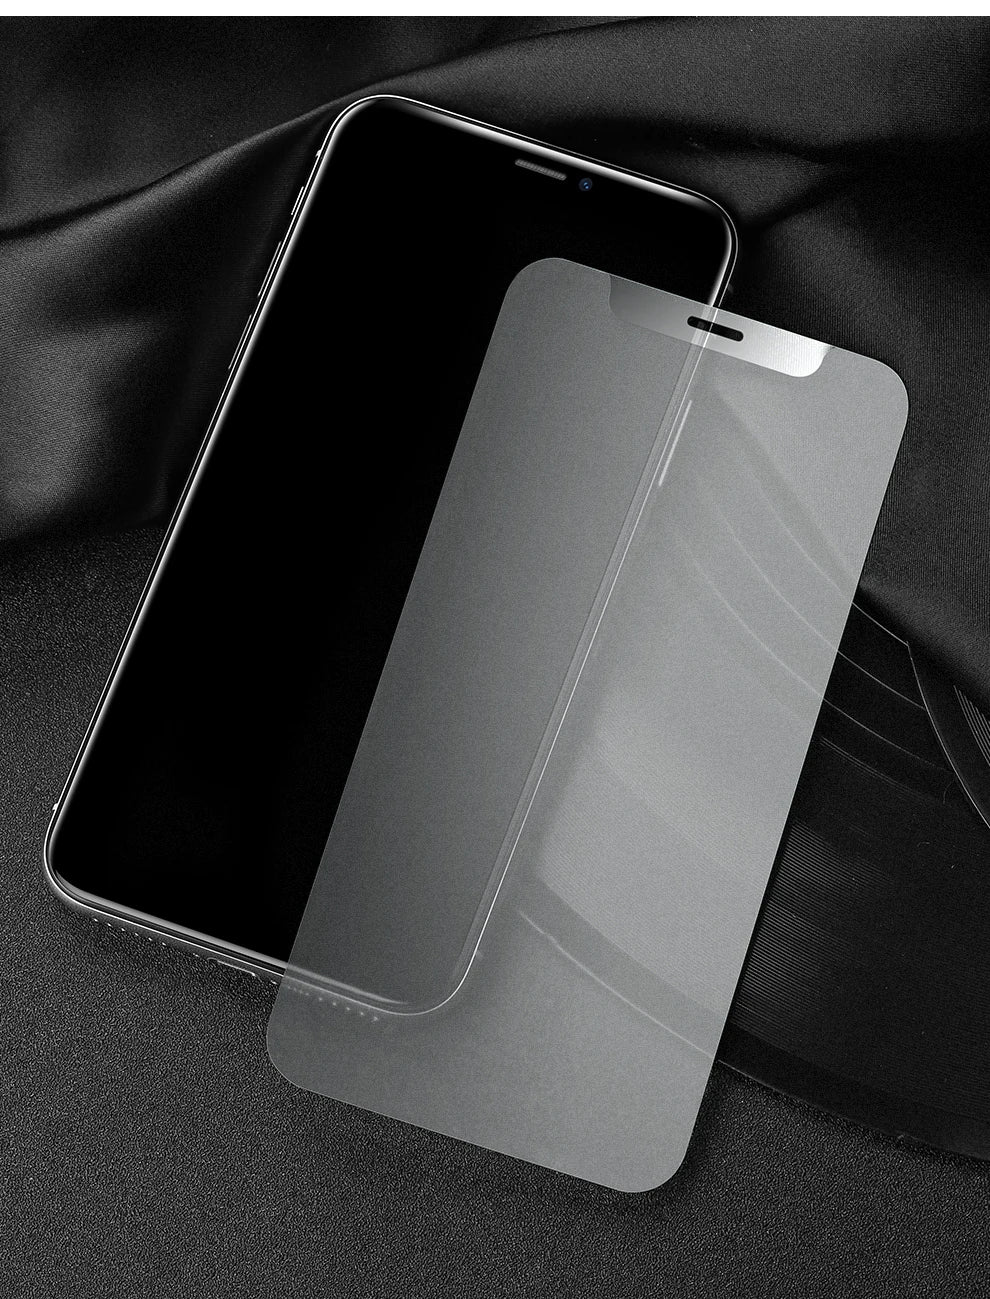 Screen Protectors For iPhone 12 11 Pro Max X XS Max XR Matte Glass Full Cover For iPhone 6 7 8 Plus Anti-Fingerprint